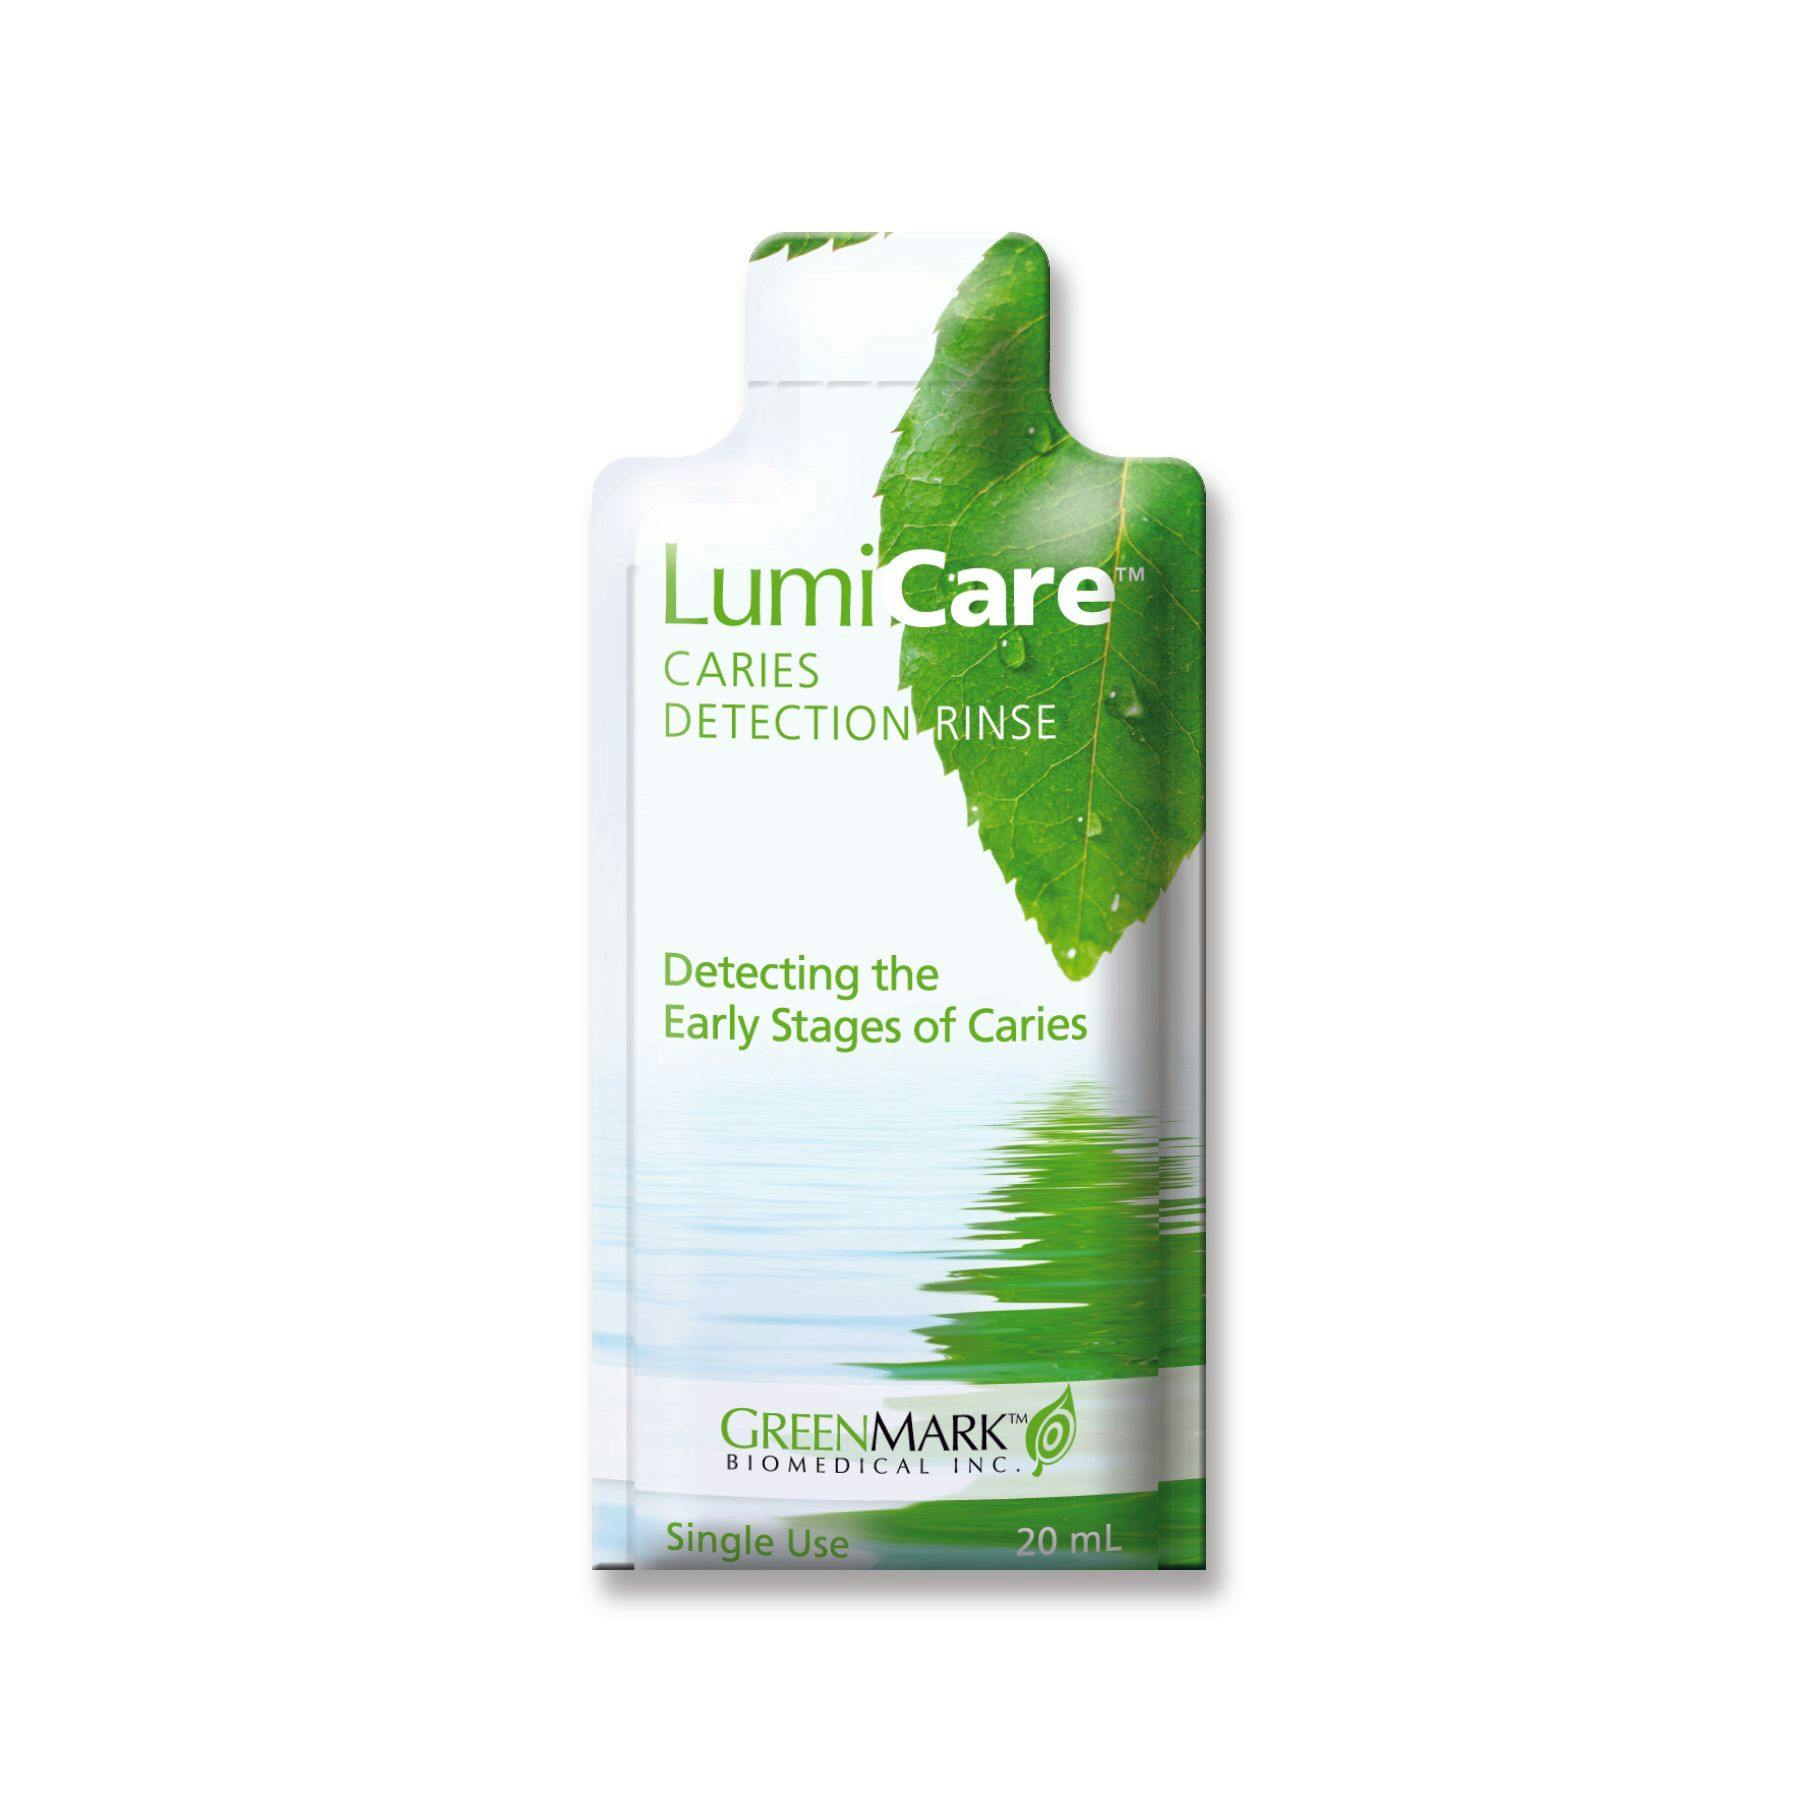 LumiCare™ Caries Detection Rinse single-use pouch.